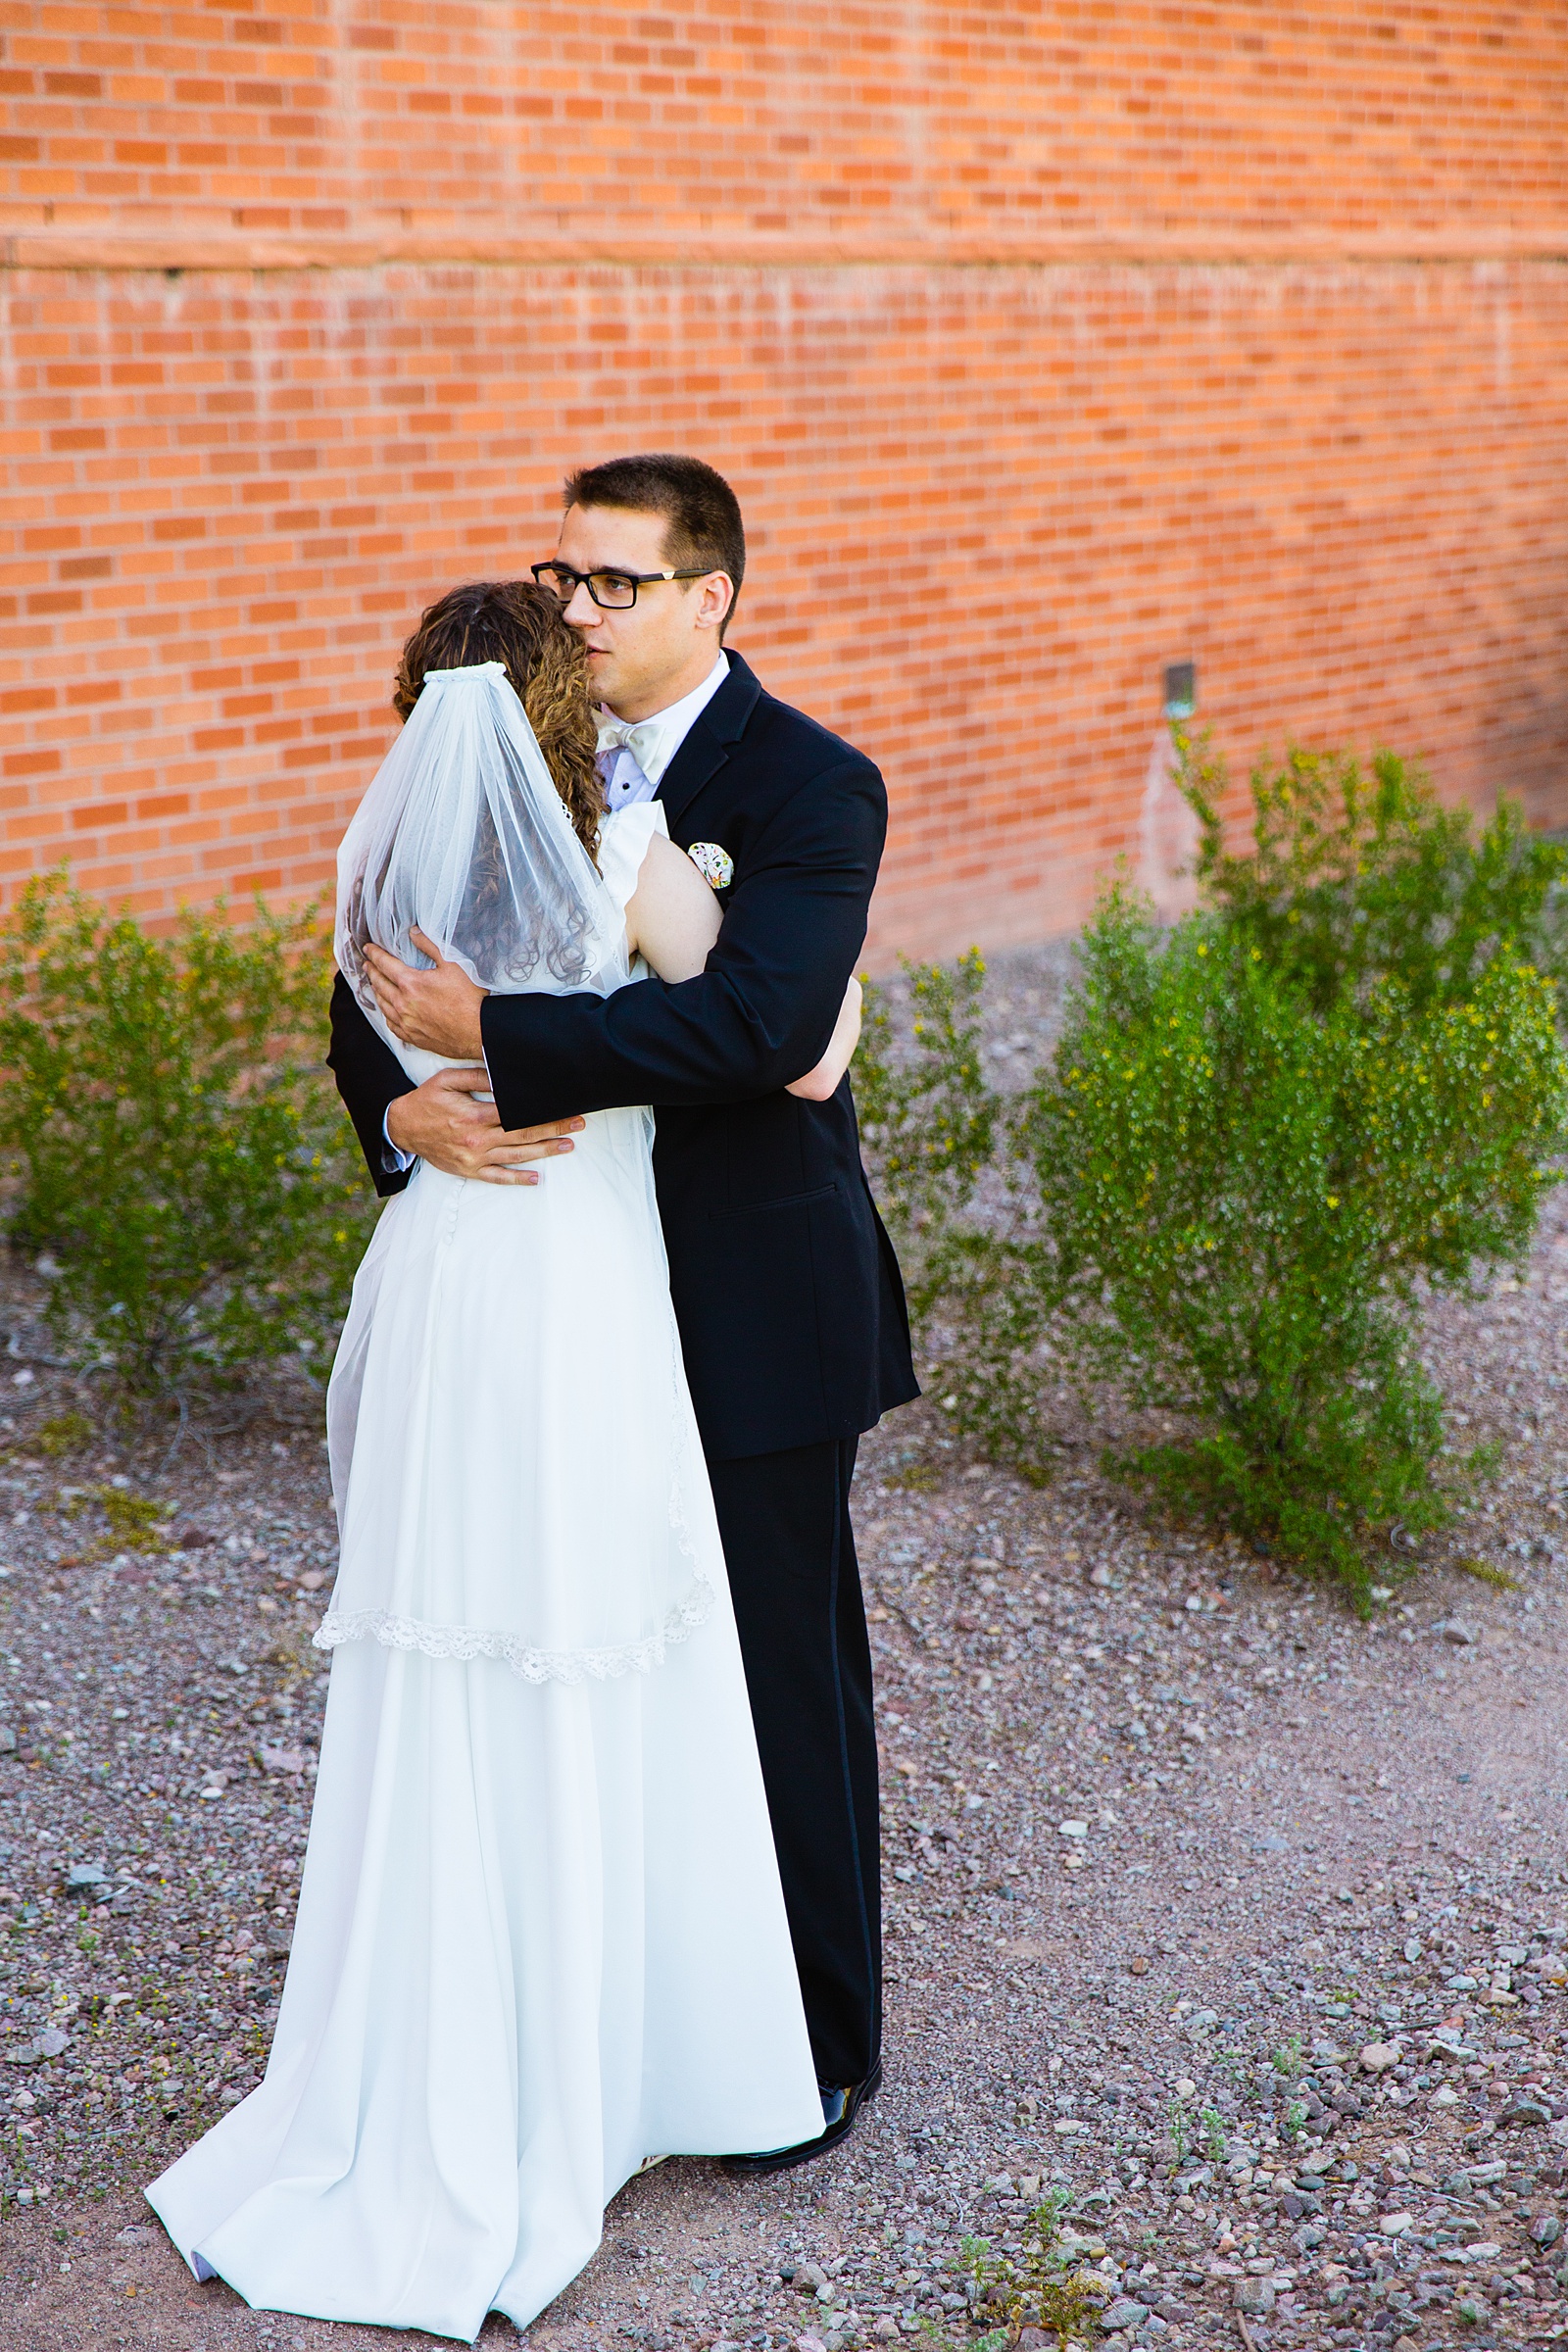 Bride and groom share an intimate moment during their first look at Arizona Historical Society by Tempe wedding photographer PMA Photography.